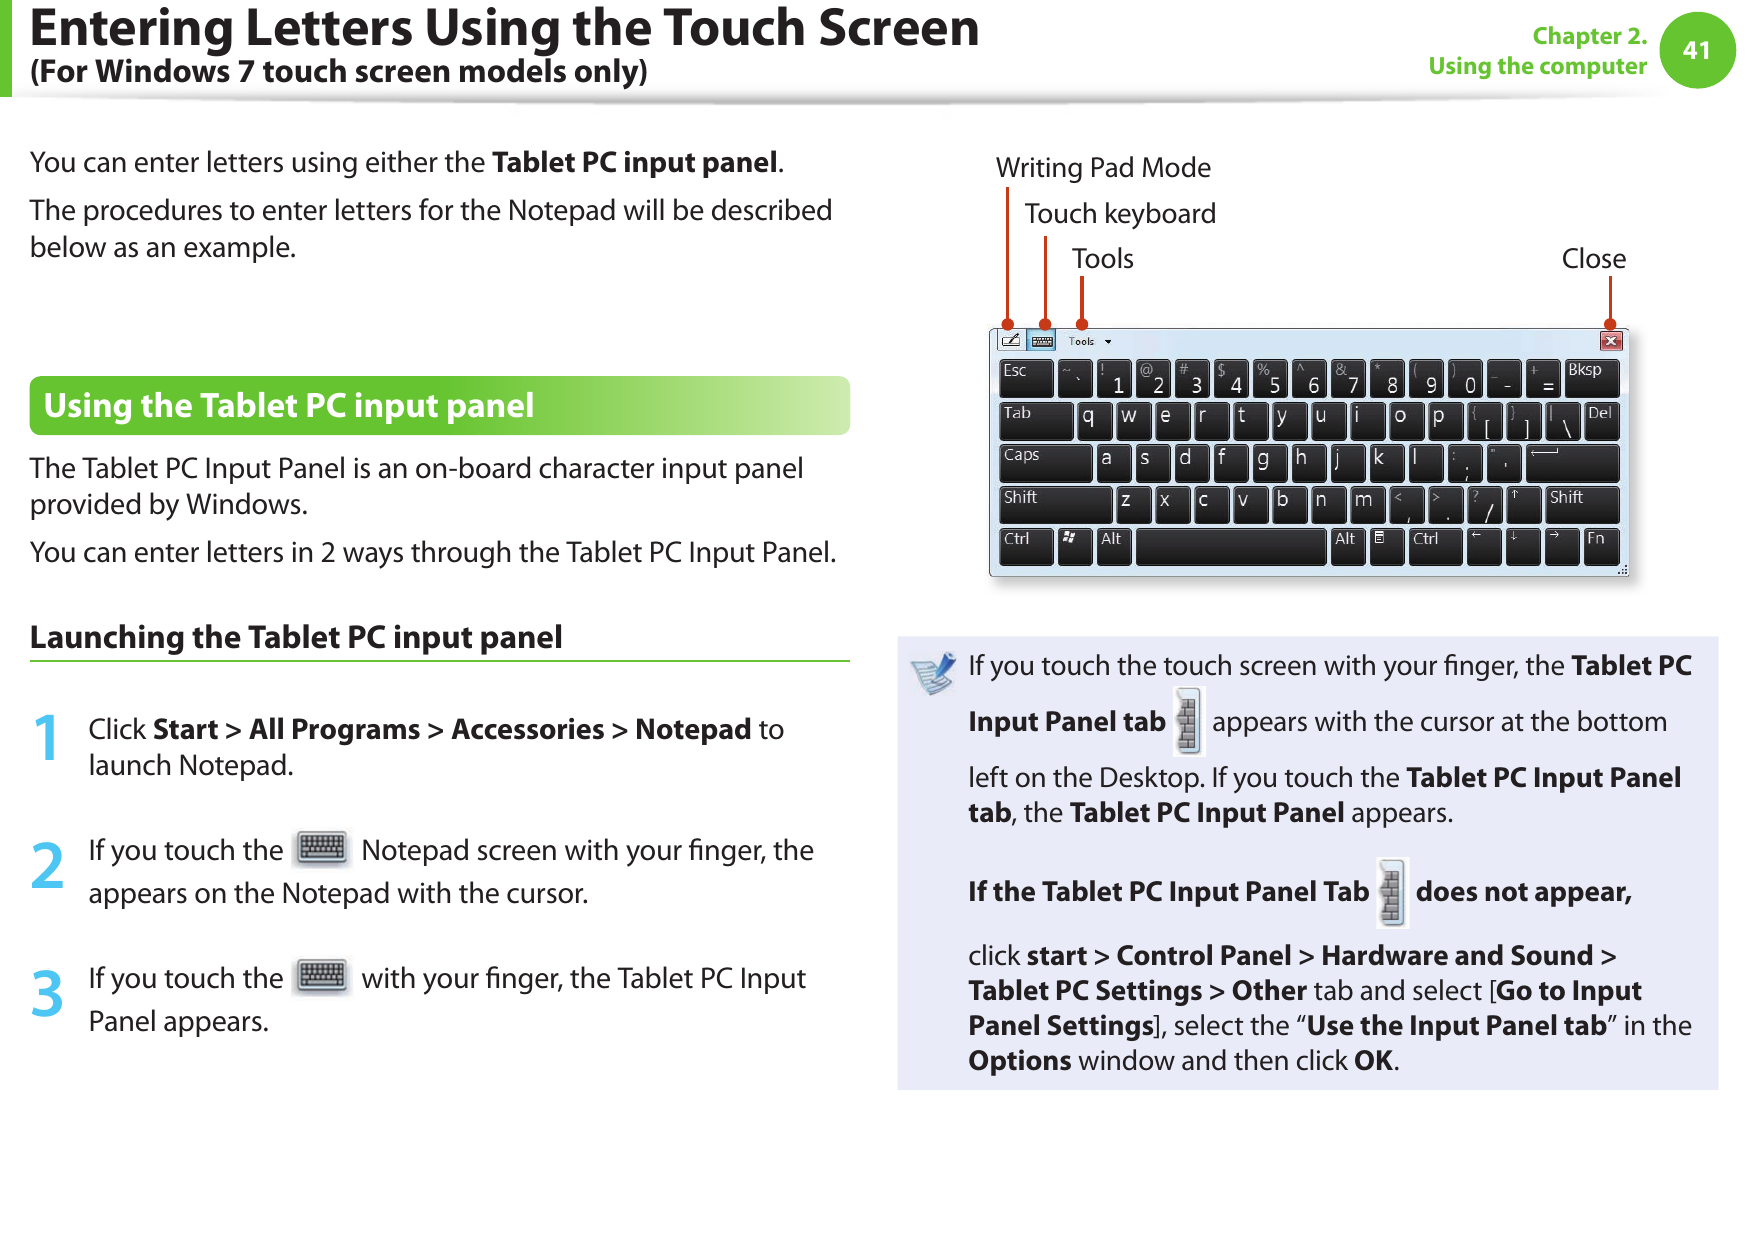 4041Chapter 2. Using the computerYou can enter letters using either the Tablet PC input panel.The procedures to enter letters for the Notepad will be described below as an example.Using the Tablet PC input panelThe Tablet PC Input Panel is an on-board character input panel provided by Windows.You can enter letters in 2 ways through the Tablet PC Input Panel.Launching the Tablet PC input panel1  Click Start &gt; All Programs &gt; Accessories &gt; Notepad to launch Notepad.2  If you touch the   Notepad screen with your  nger, the appears on the Notepad with the cursor.3  If you touch the   with your  nger, the Tablet PC Input Panel appears.Tools CloseWriting Pad ModeTouch keyboardIf you touch the touch screen with your  nger, the Tablet PC Input Panel tab  appears with the cursor at the bottom left on the Desktop. If you touch the Tablet PC Input Panel tab, the Tablet PC Input Panel appears.If the Tablet PC Input Panel Tab  does not appear,click start &gt; Control Panel &gt; Hardware and Sound &gt; Tablet PC Settings &gt; Other tab and select [Go to Input Panel Settings], select the “Use the Input Panel tab” in the Options window and then click OK.Entering Letters Using the Touch Screen (For Windows 7 touch screen models only)